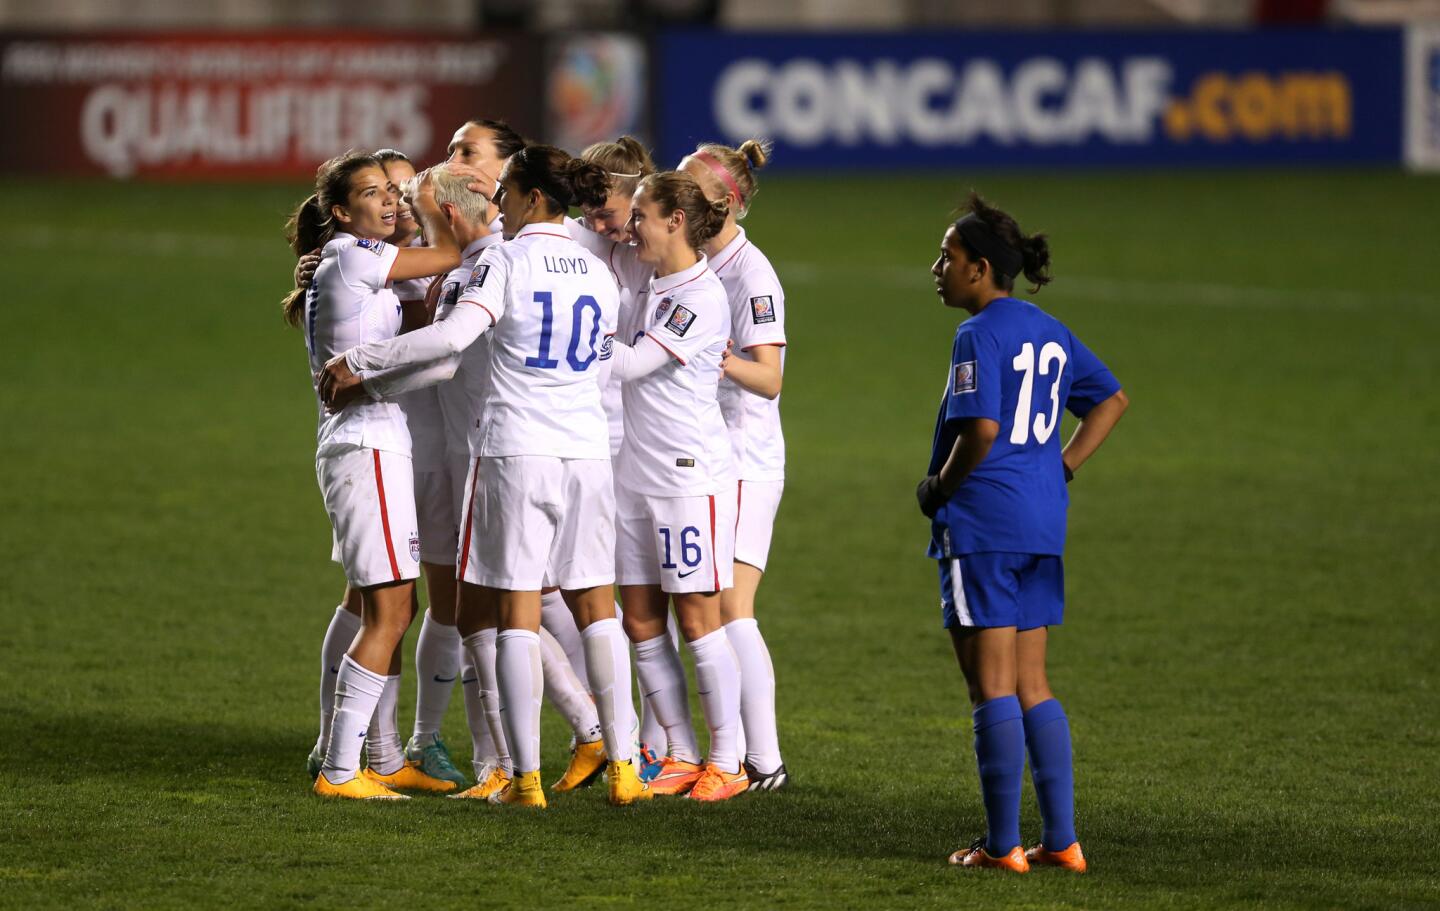 USA celebrates a goal by Megan Rapinoe in the second half.